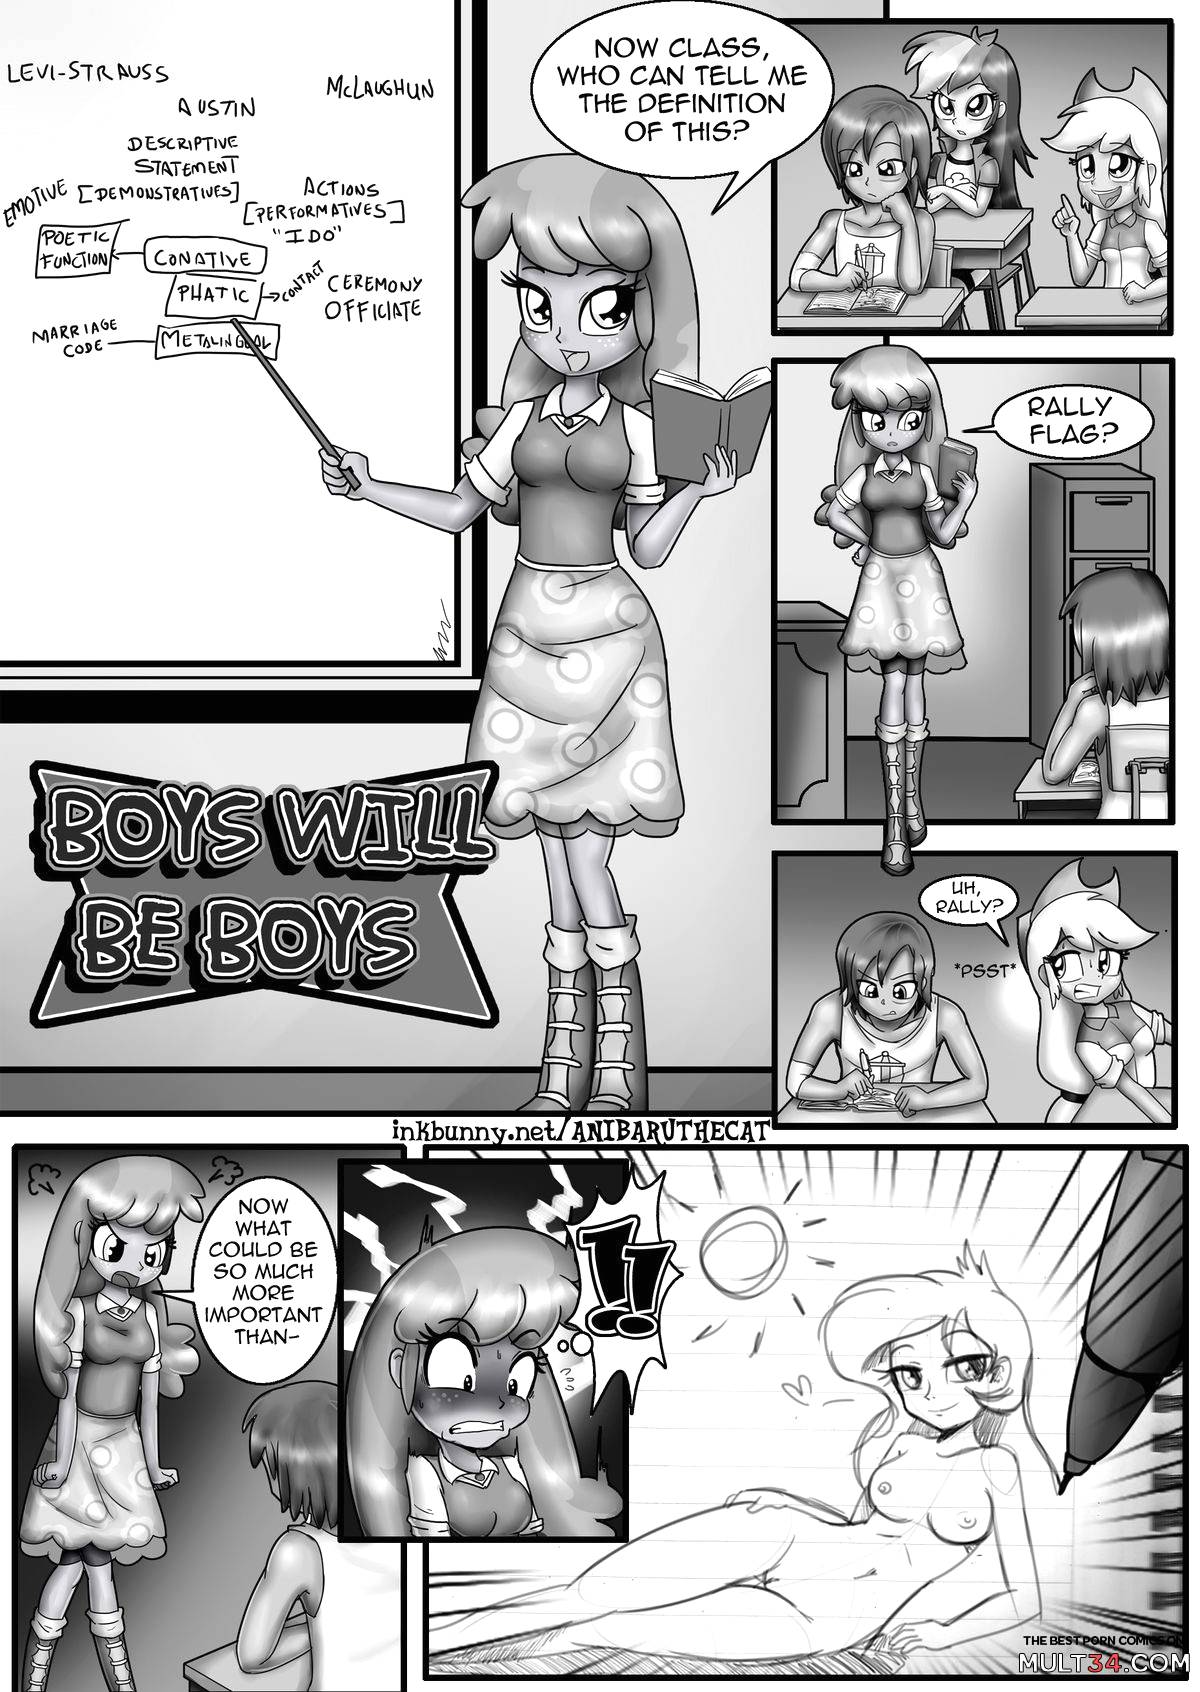 Boys will be Boys page 2